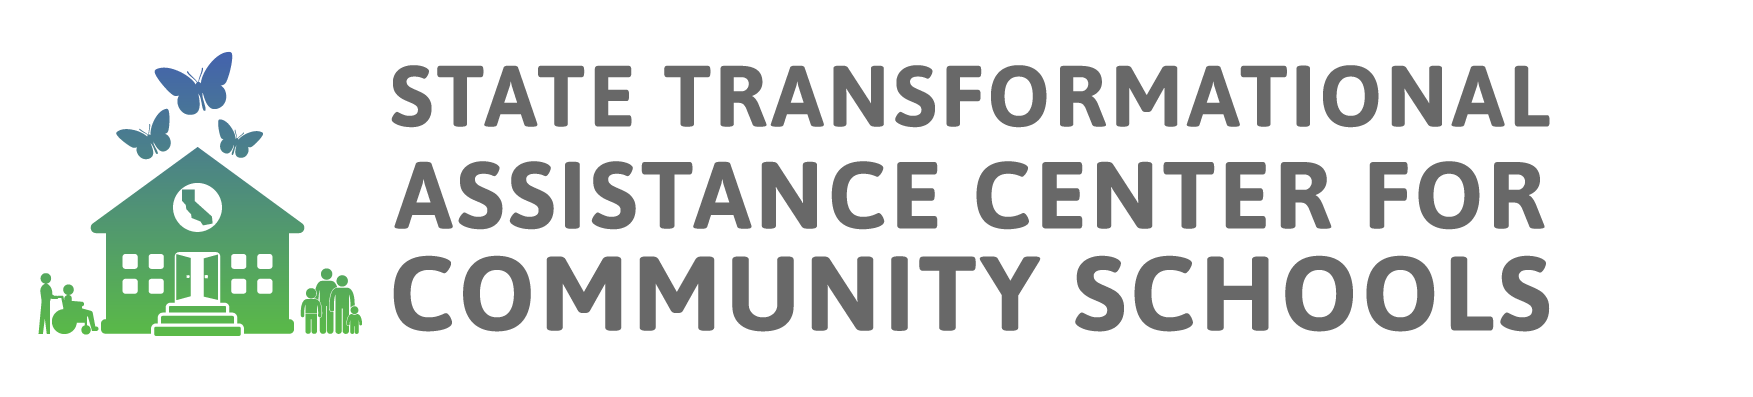 State Transformational Assistance Center for Community Schools